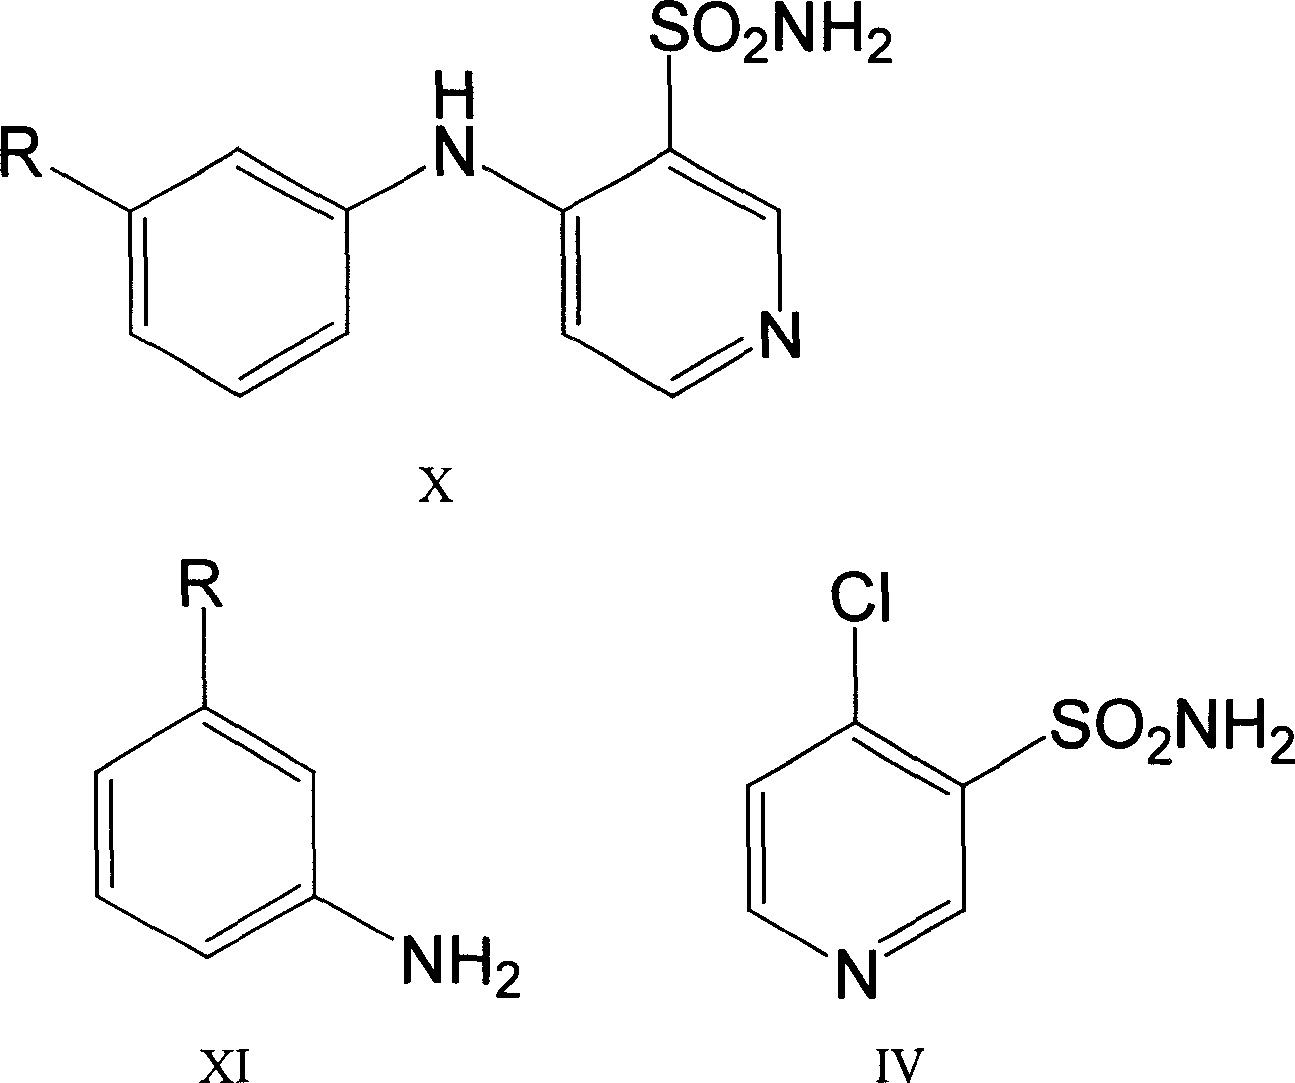 Process for preparing Torasemide intermediate and its analogue